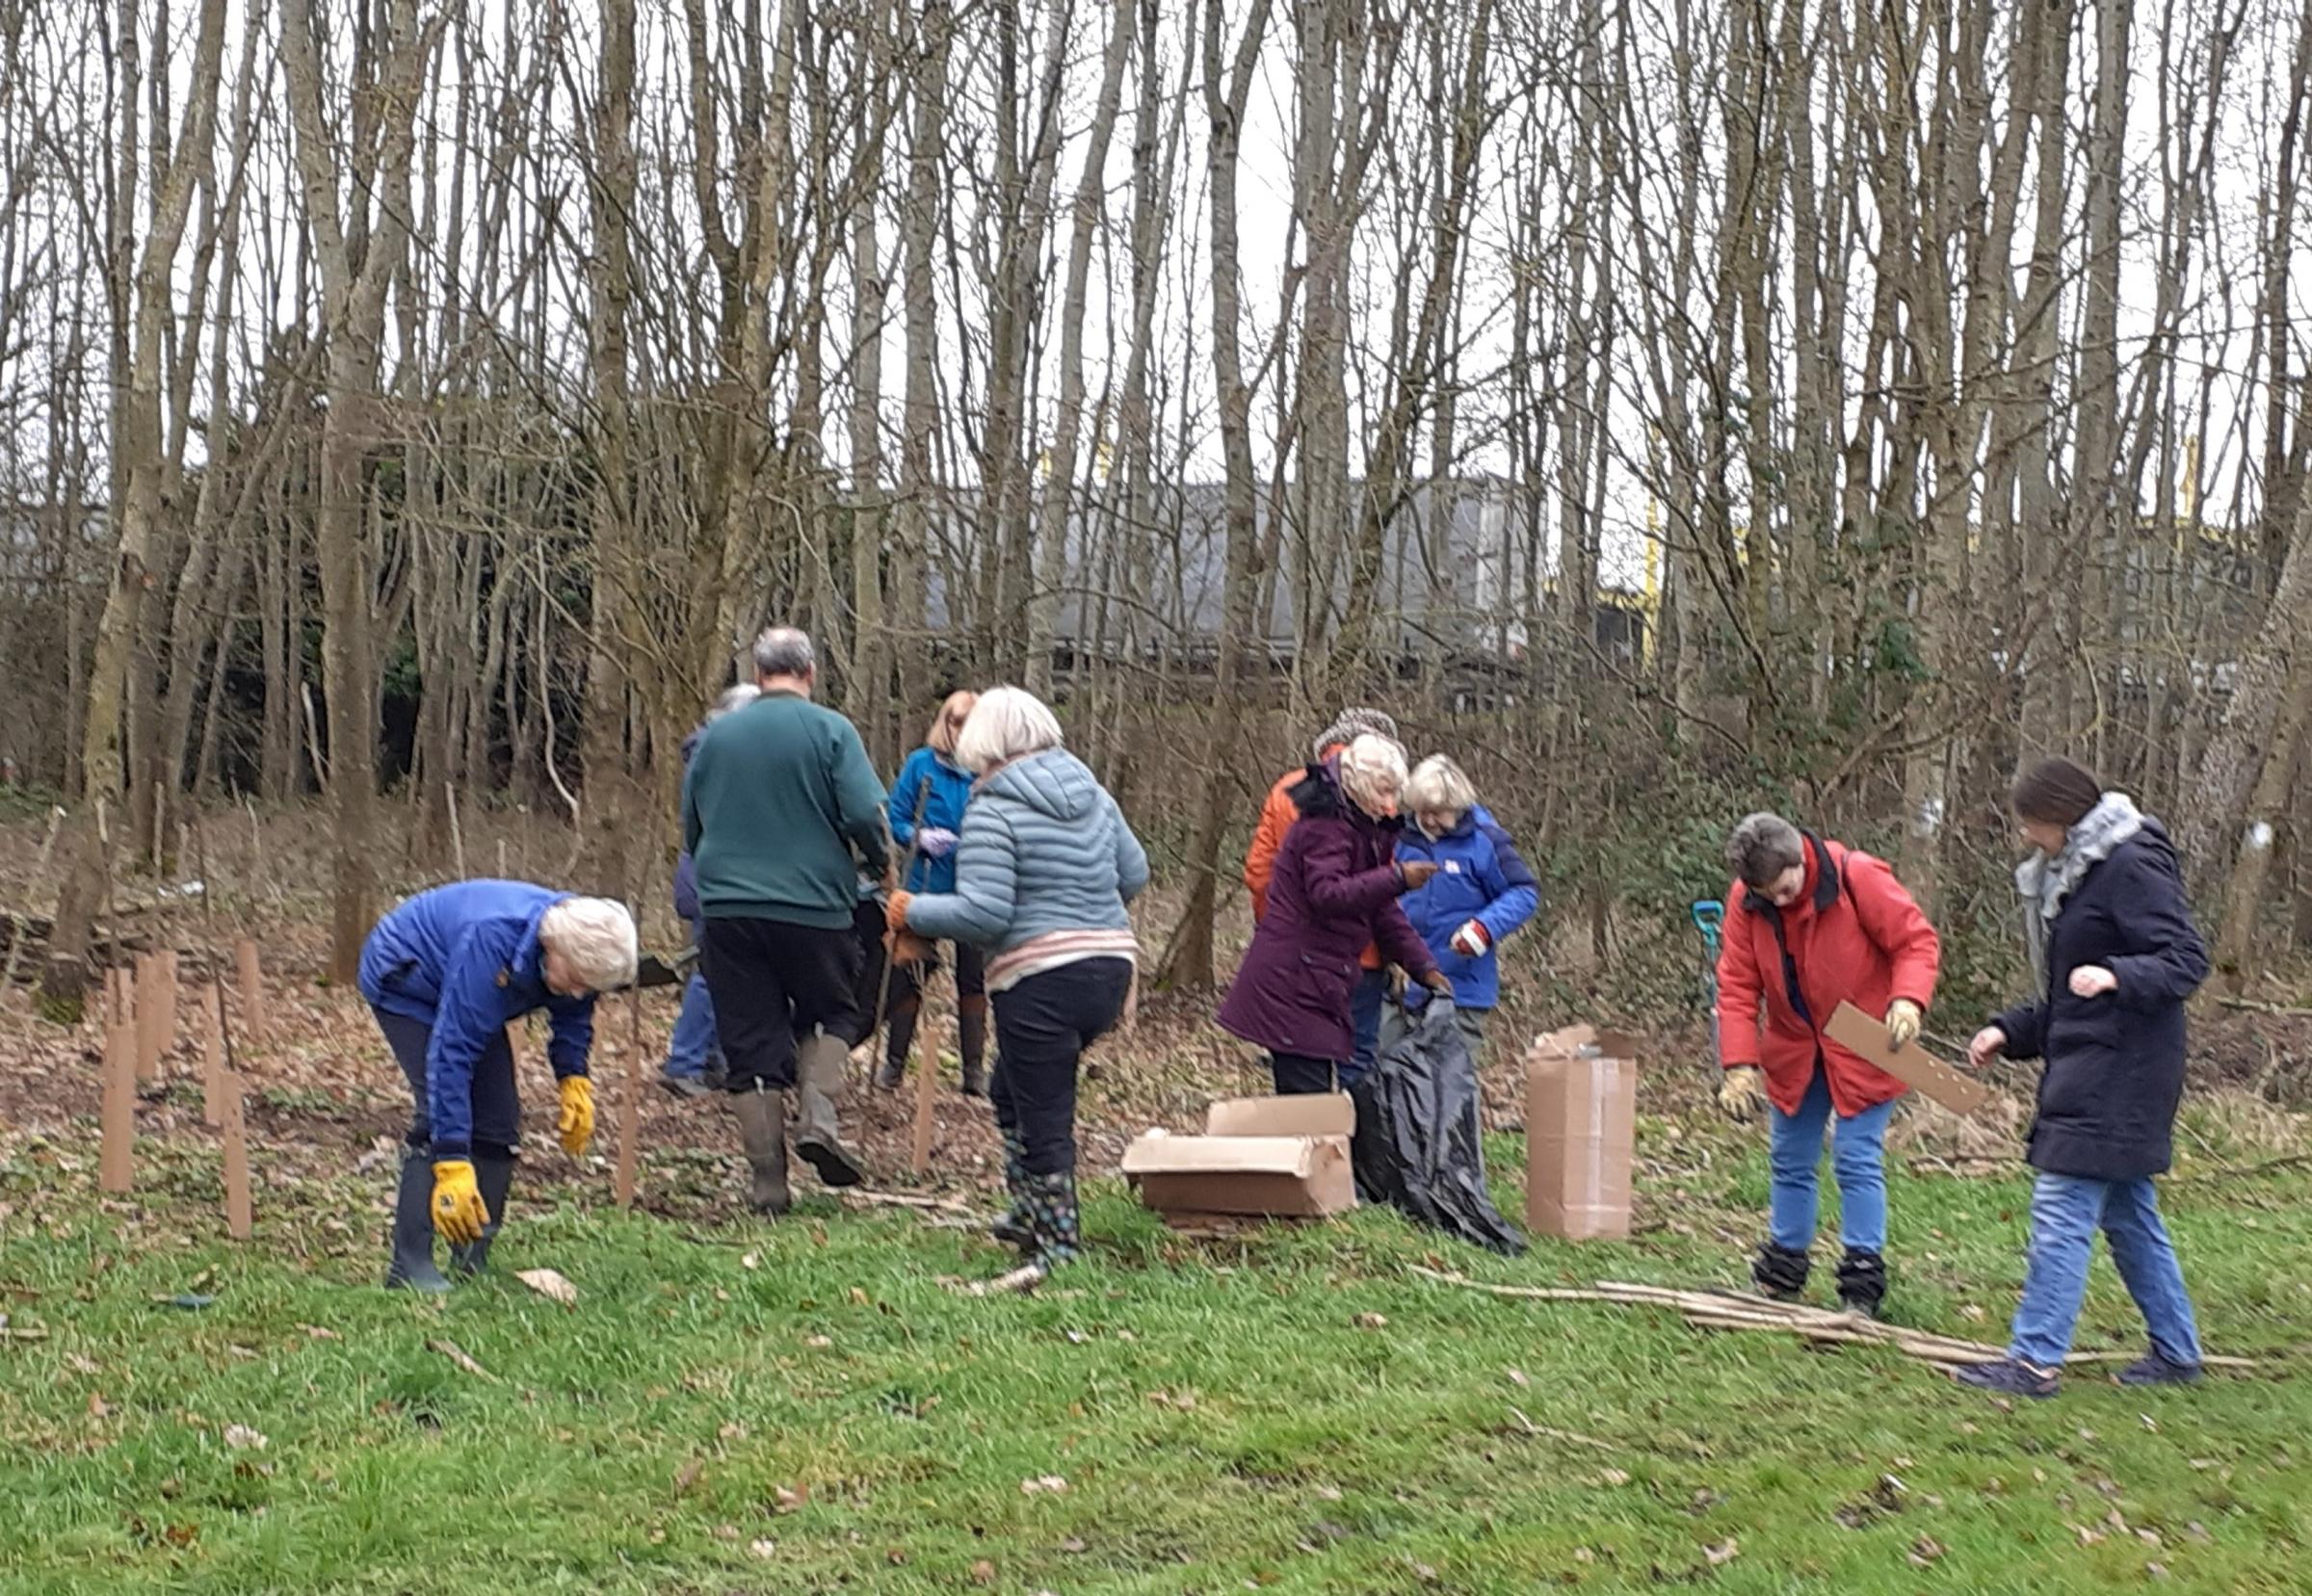 More than 100 wild cherry trees planted in Swindon nature reserve by Soroptimists Swindon Advertiser